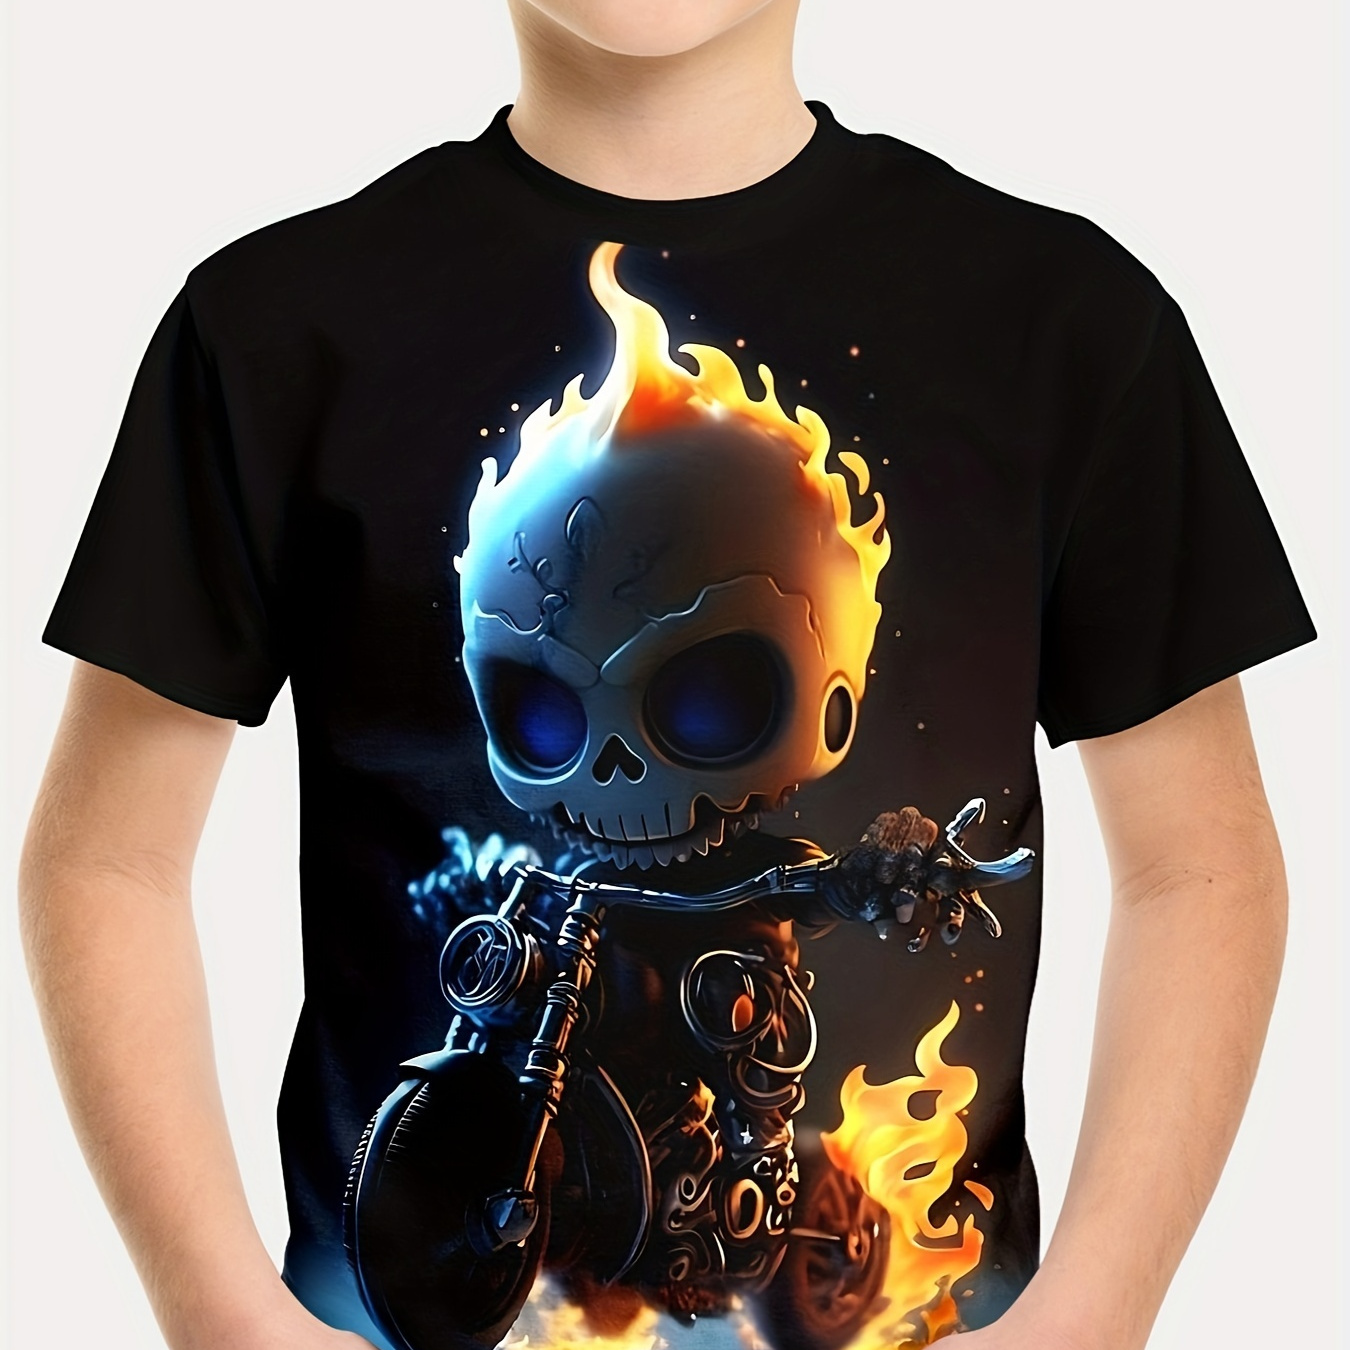 

Cool Skull Motorcycle Rider 3d Print Tee Tops, Boy's Round Neck Casual Short Sleeve Soft Versatile T-shirt